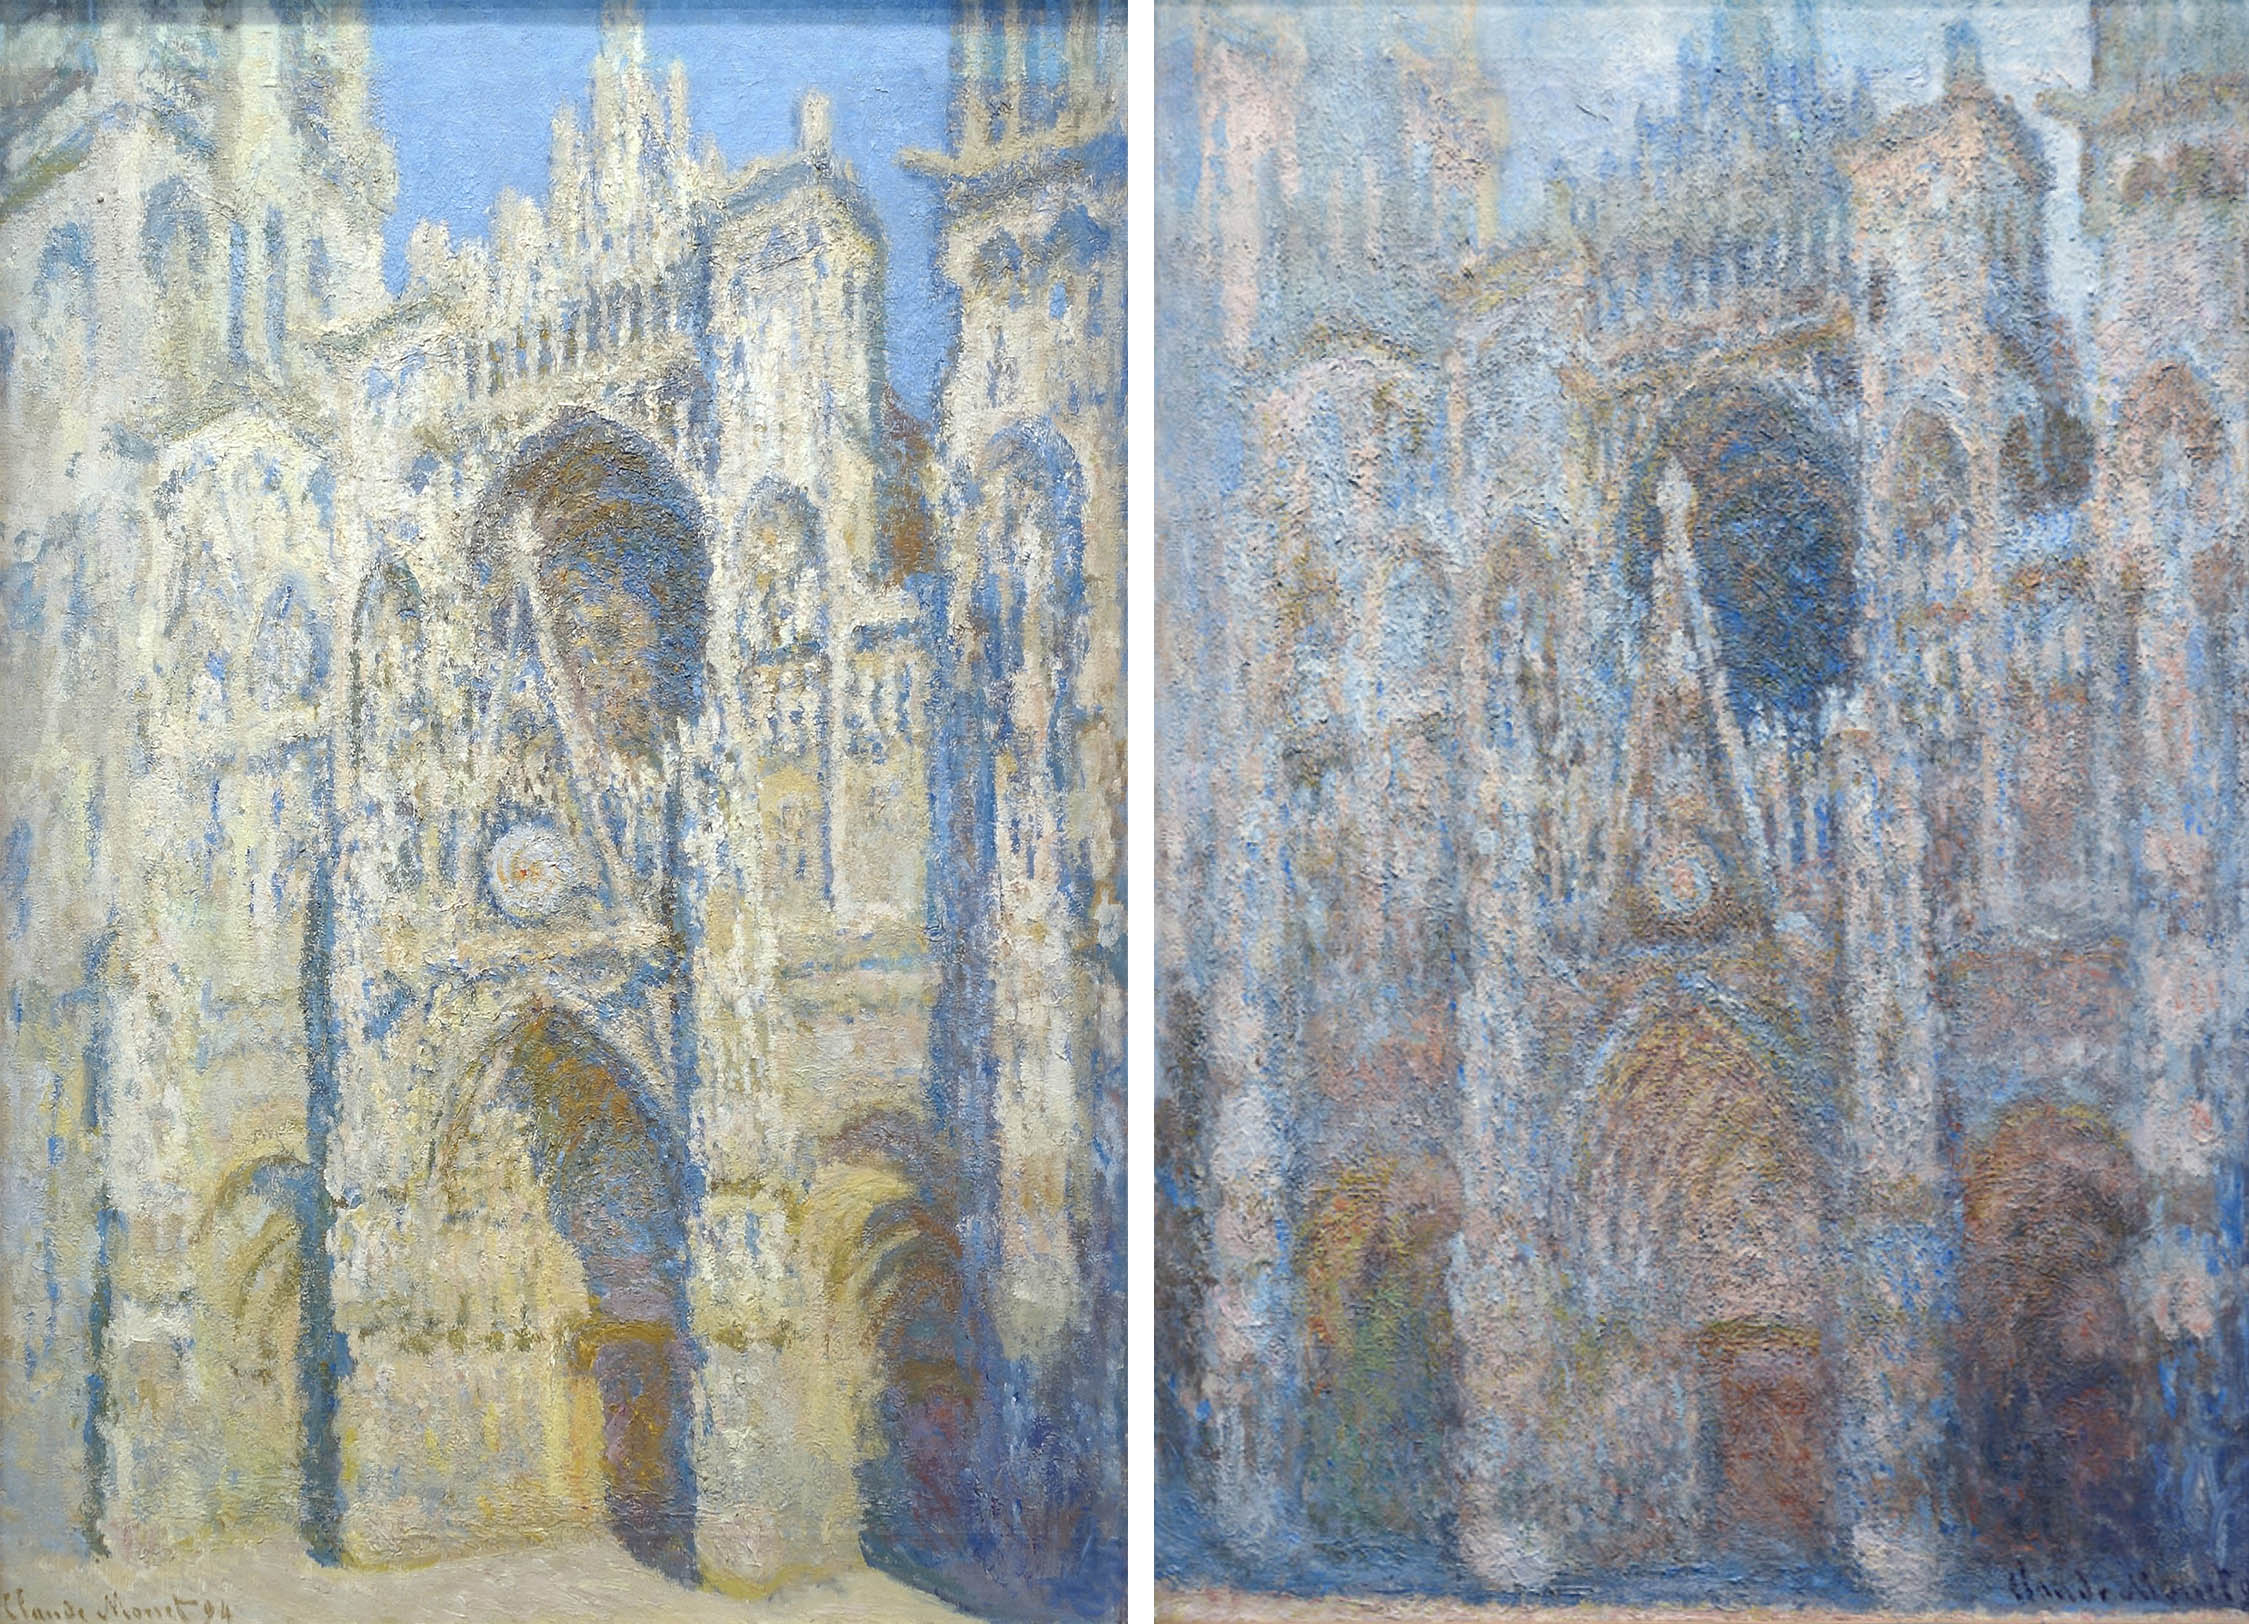 Left: Claude Monet, Rouen Cathedral (The Portal and the Tour d'Albane in full Sunlight) also called Harmony in Blue and Gold, painted 1893, dated 1894, oil on canvas, 107 x 73 cm (Musée d'Orsay); Right: Rouen Cathedral, Portal, Morning sun, 1893, oil on canvas, 92.2 x 63.0 (Musée d'Orsay)